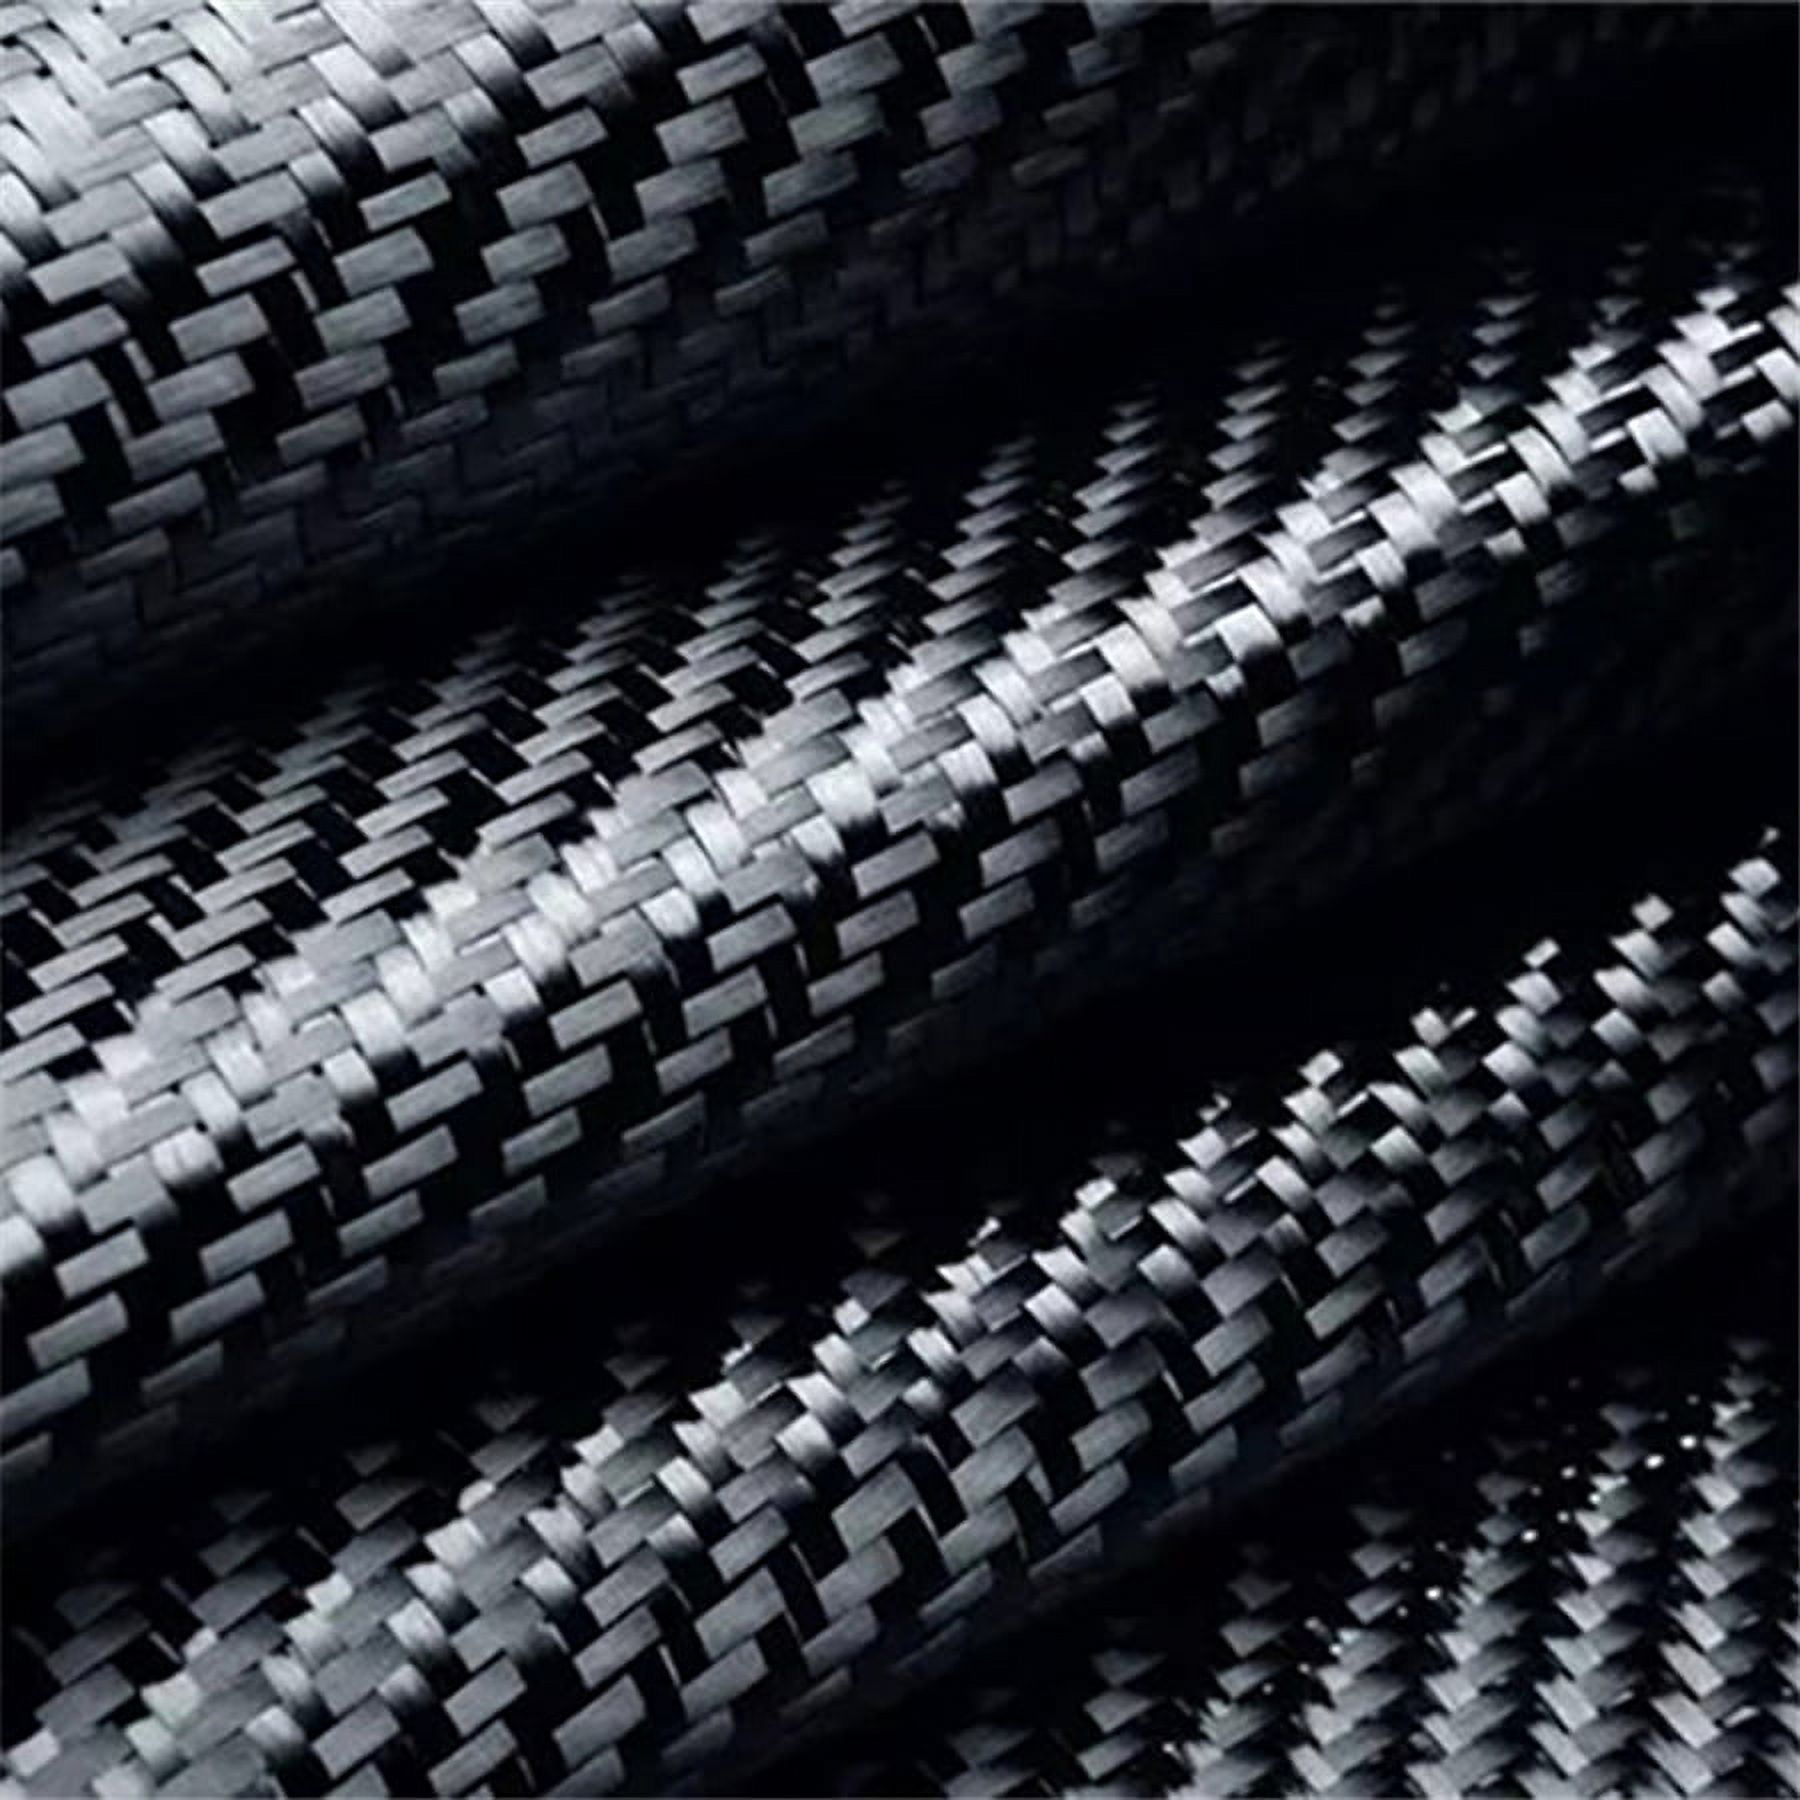 Affordable Wholesale Carbon Fiber Cloth and Resin For A Variety Of Uses 